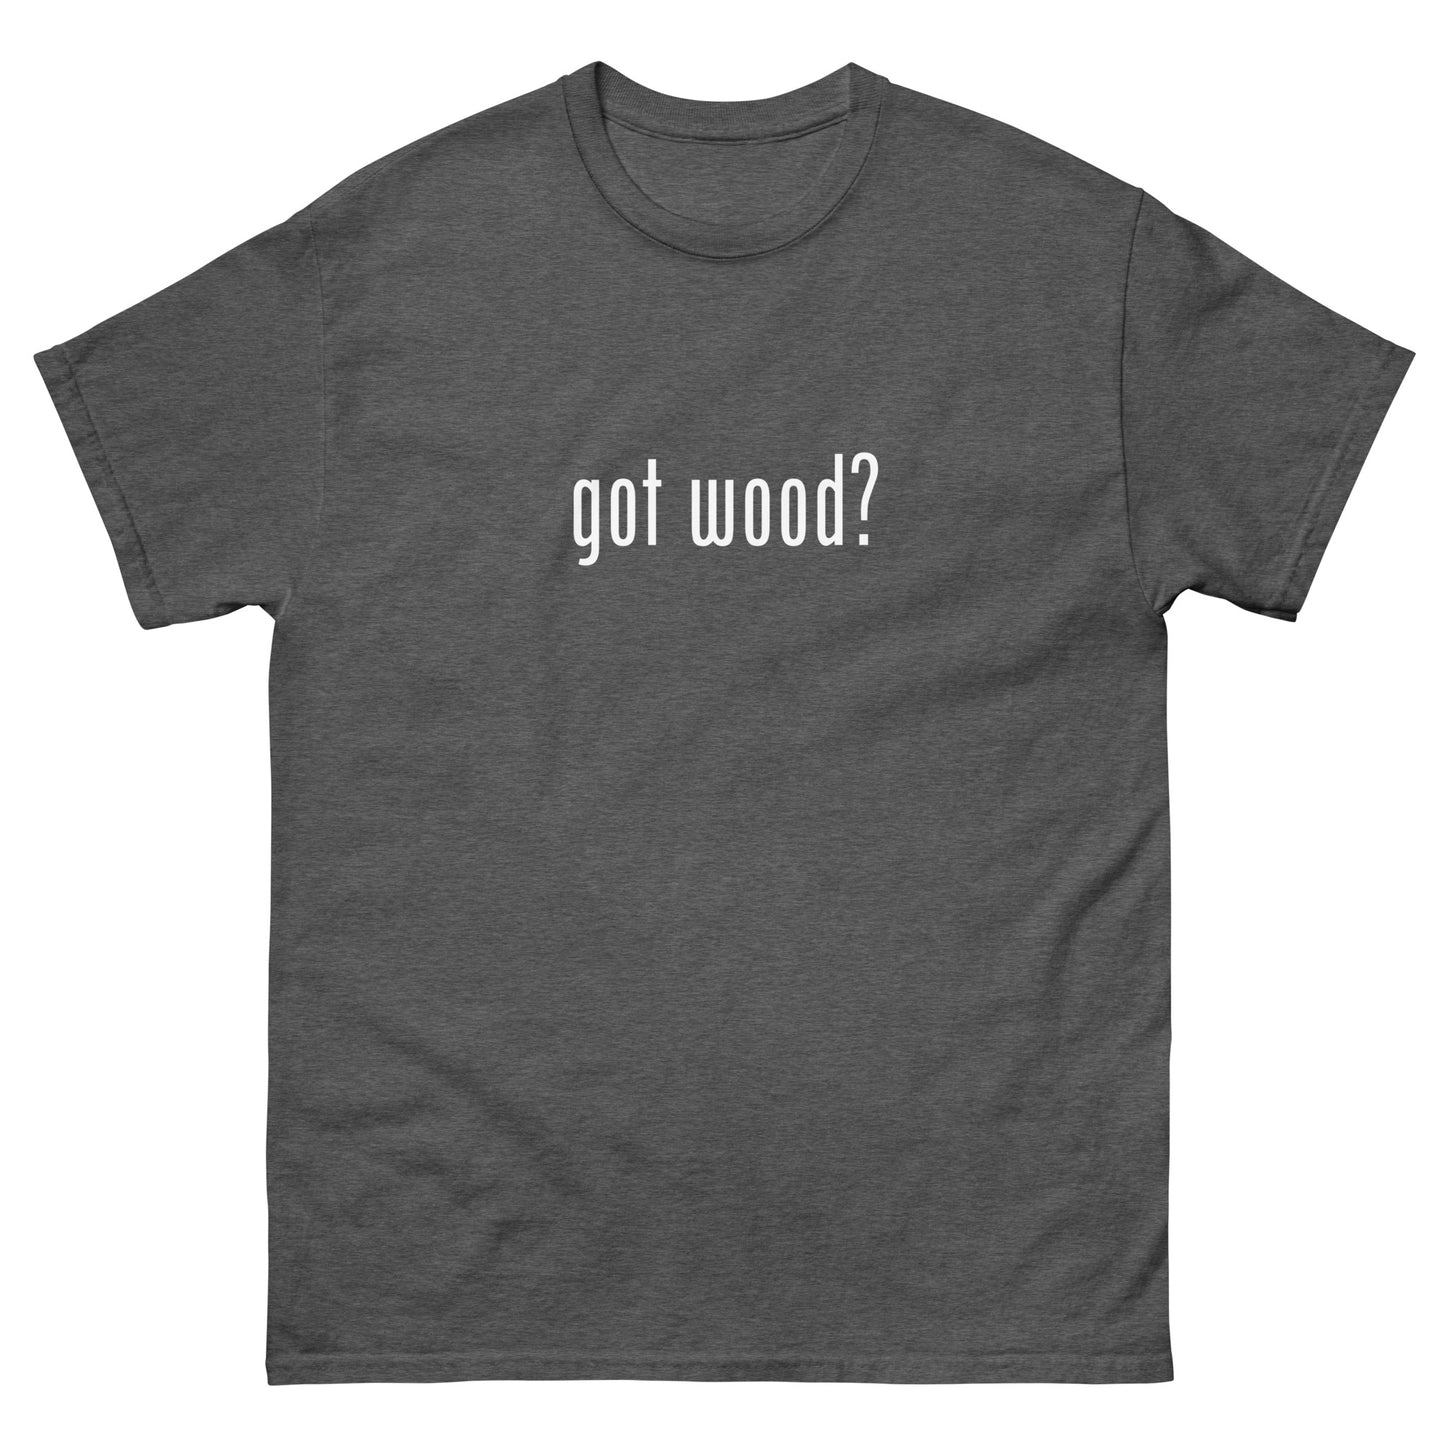 “got wood?” Woodworking T Shirt – White Ink (Multiple Colors)